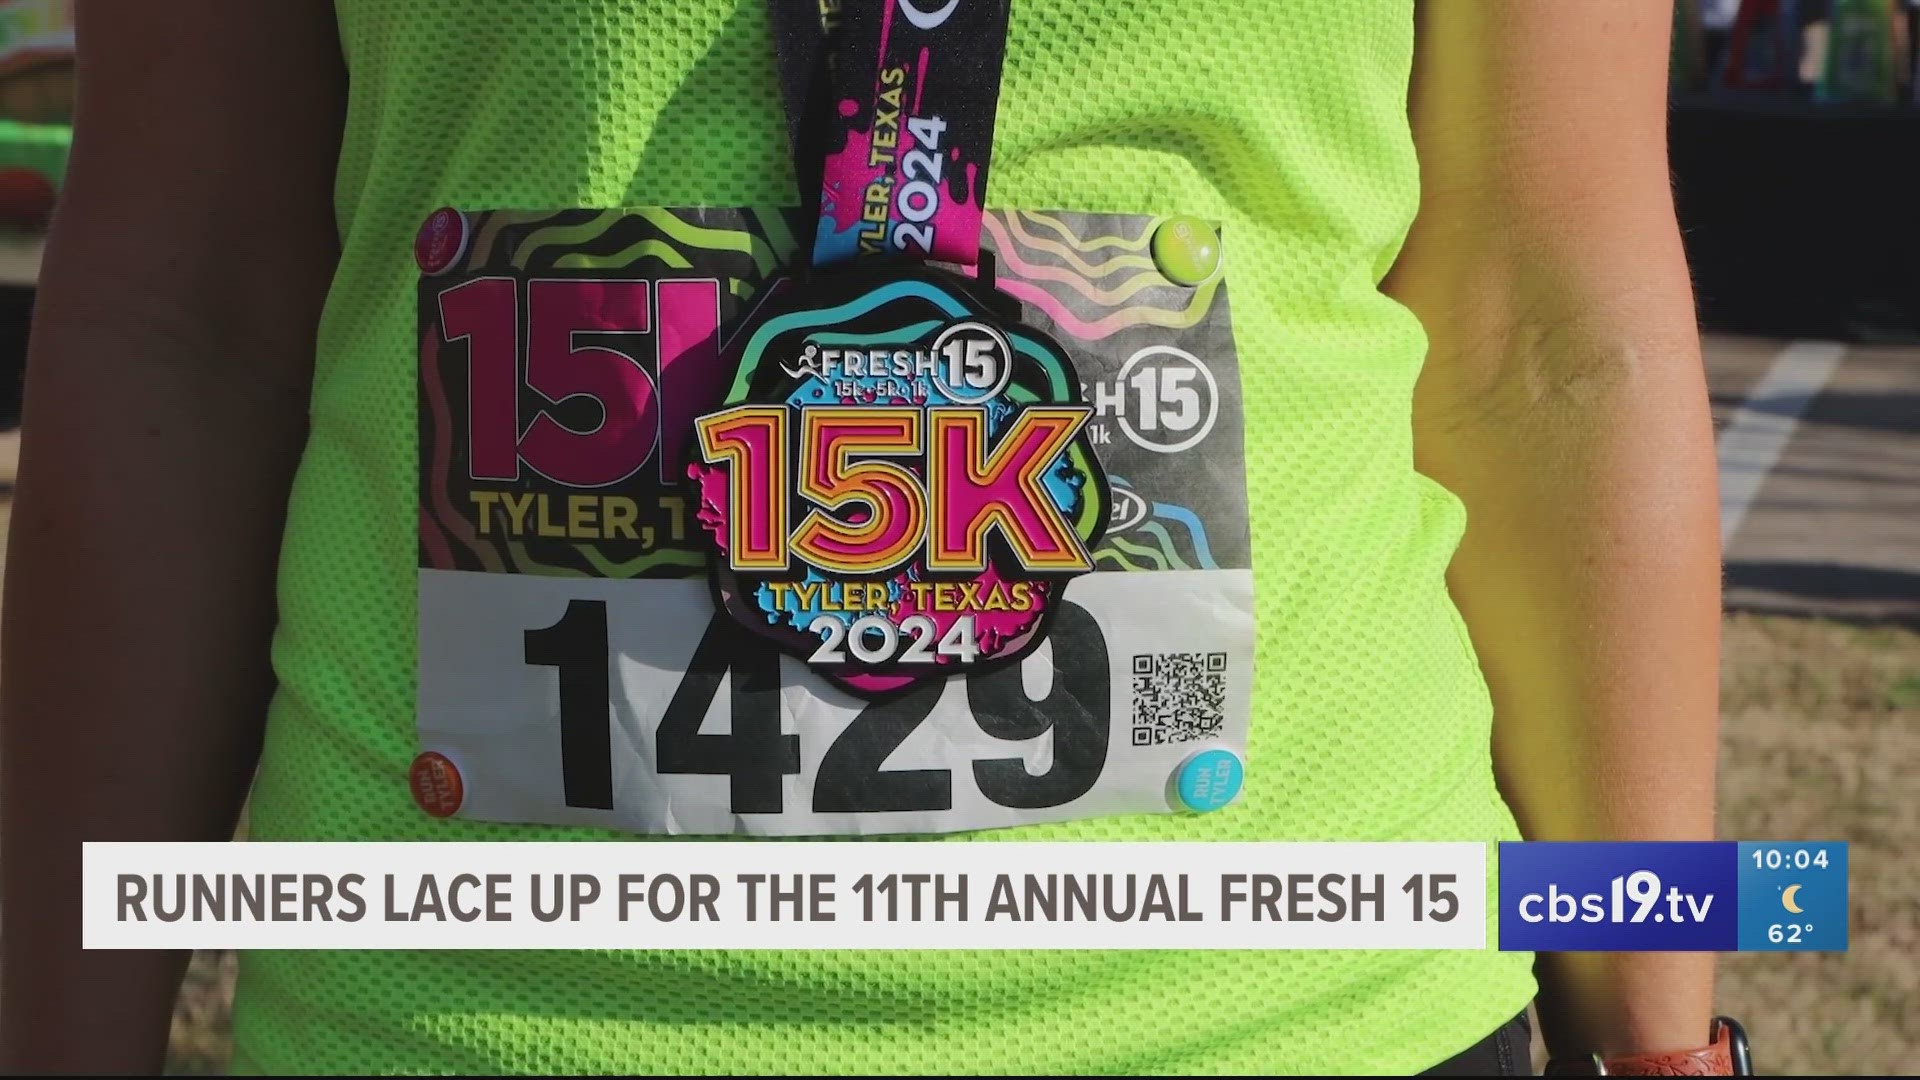 Runners lace up for the 11th annual Fresh 15